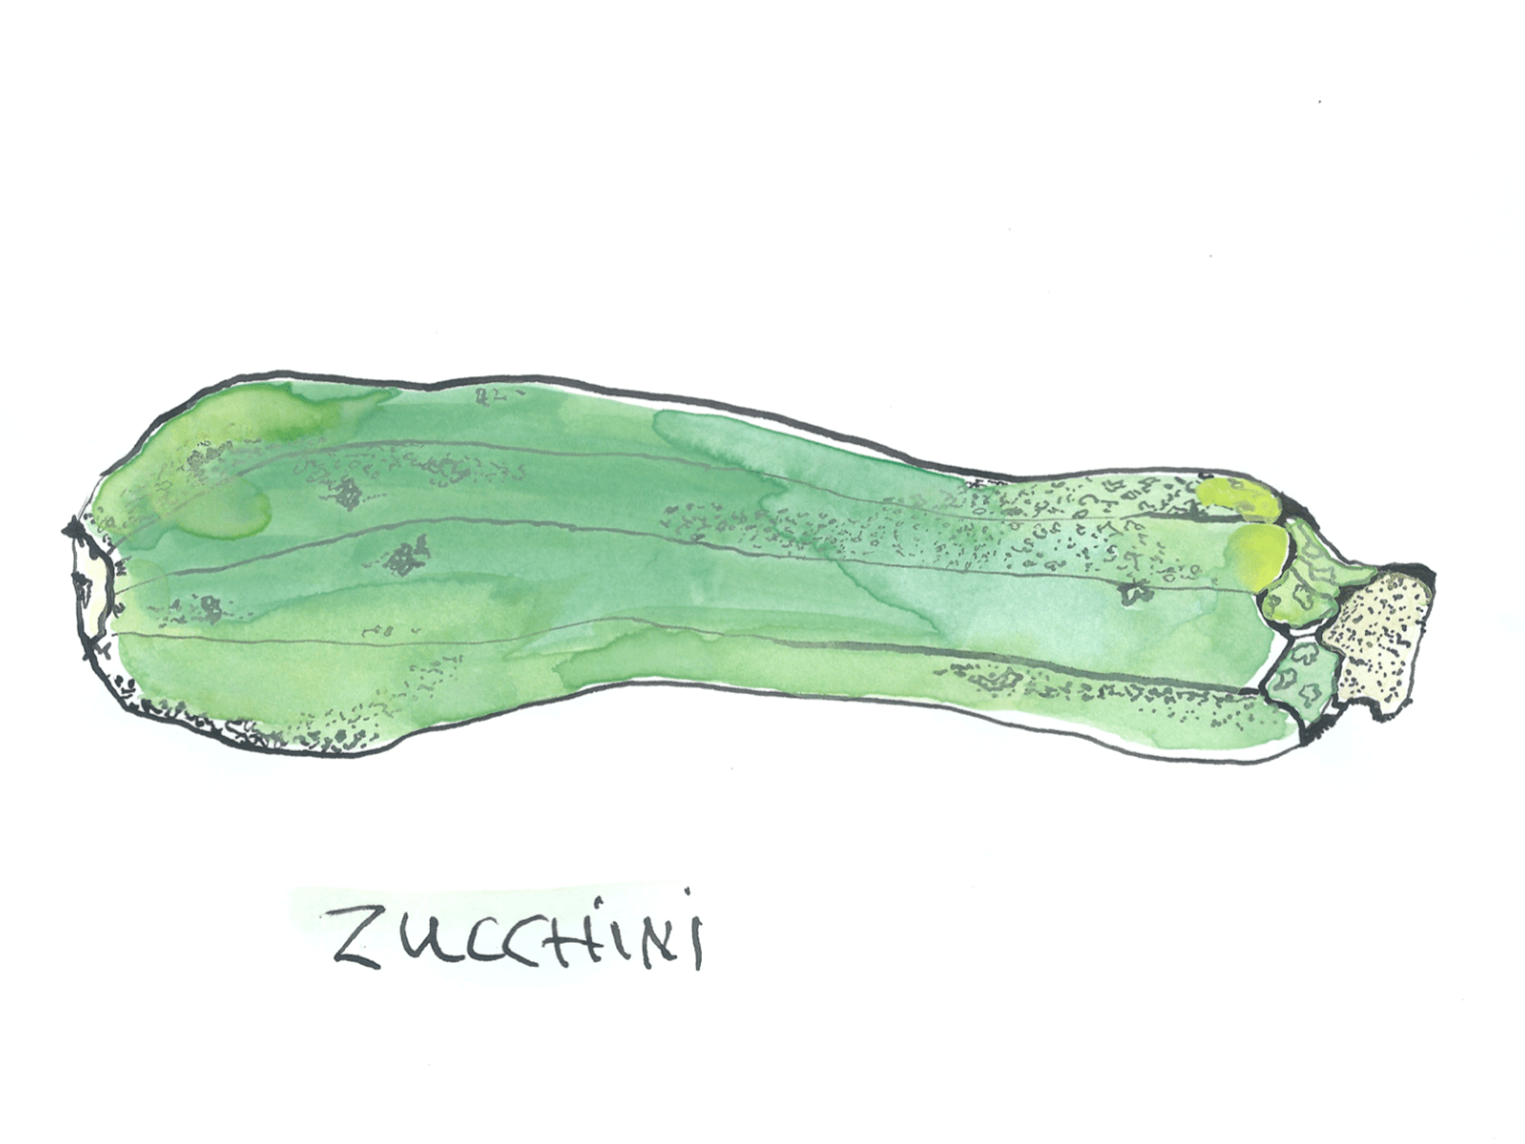 Courgette.png